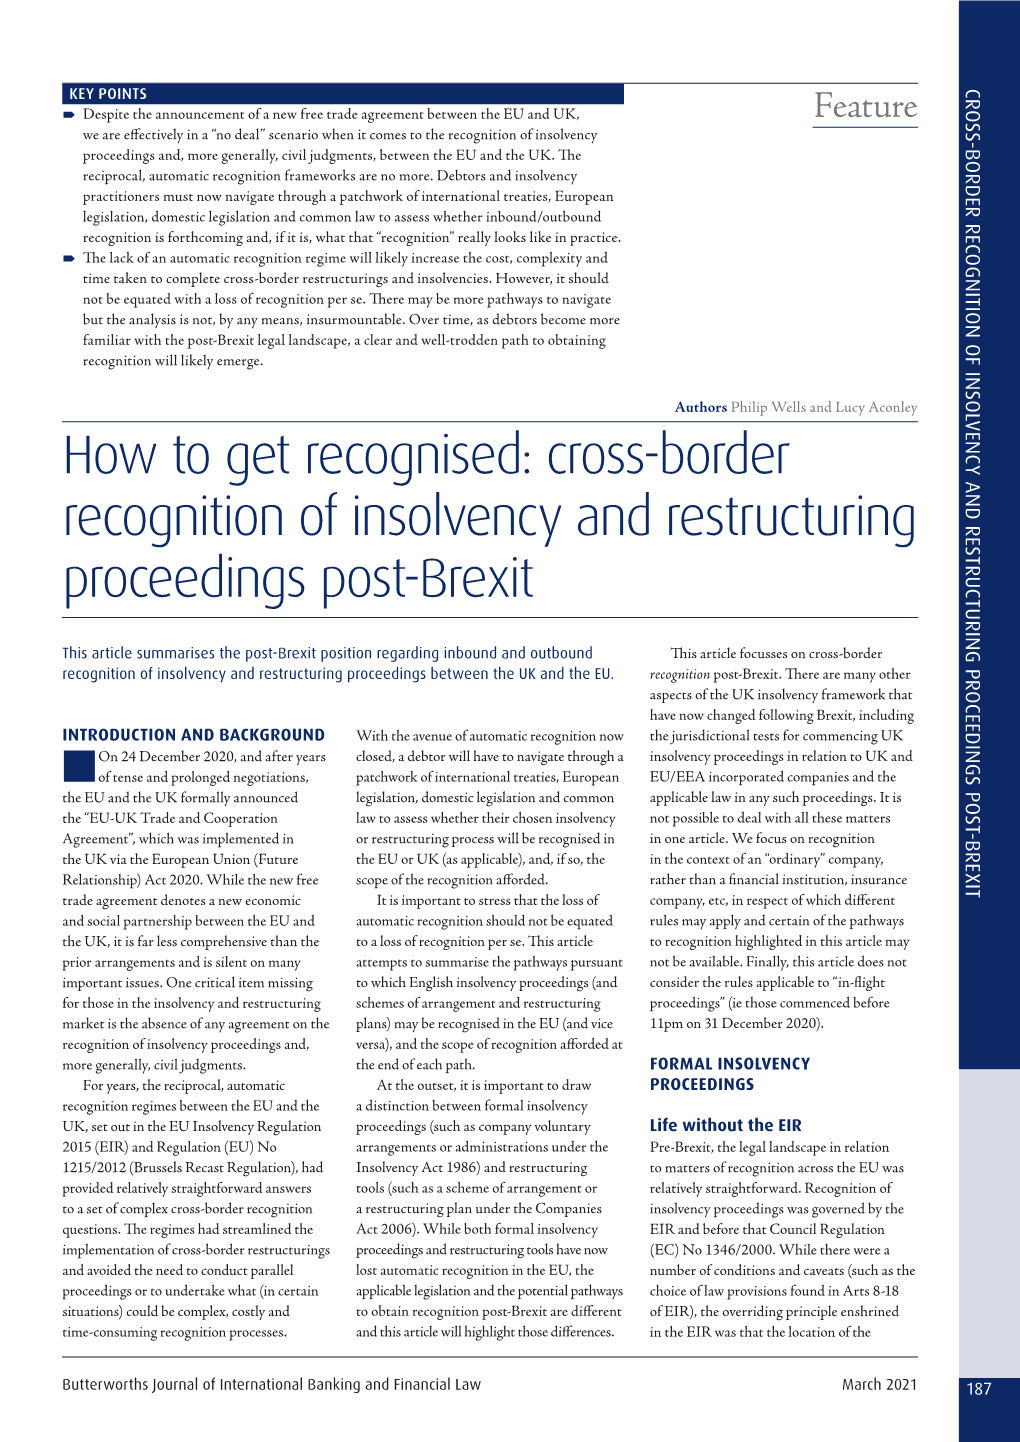 Cross-Border Recognition of Insolvency and Restructuring Proceedings Post-Brexit